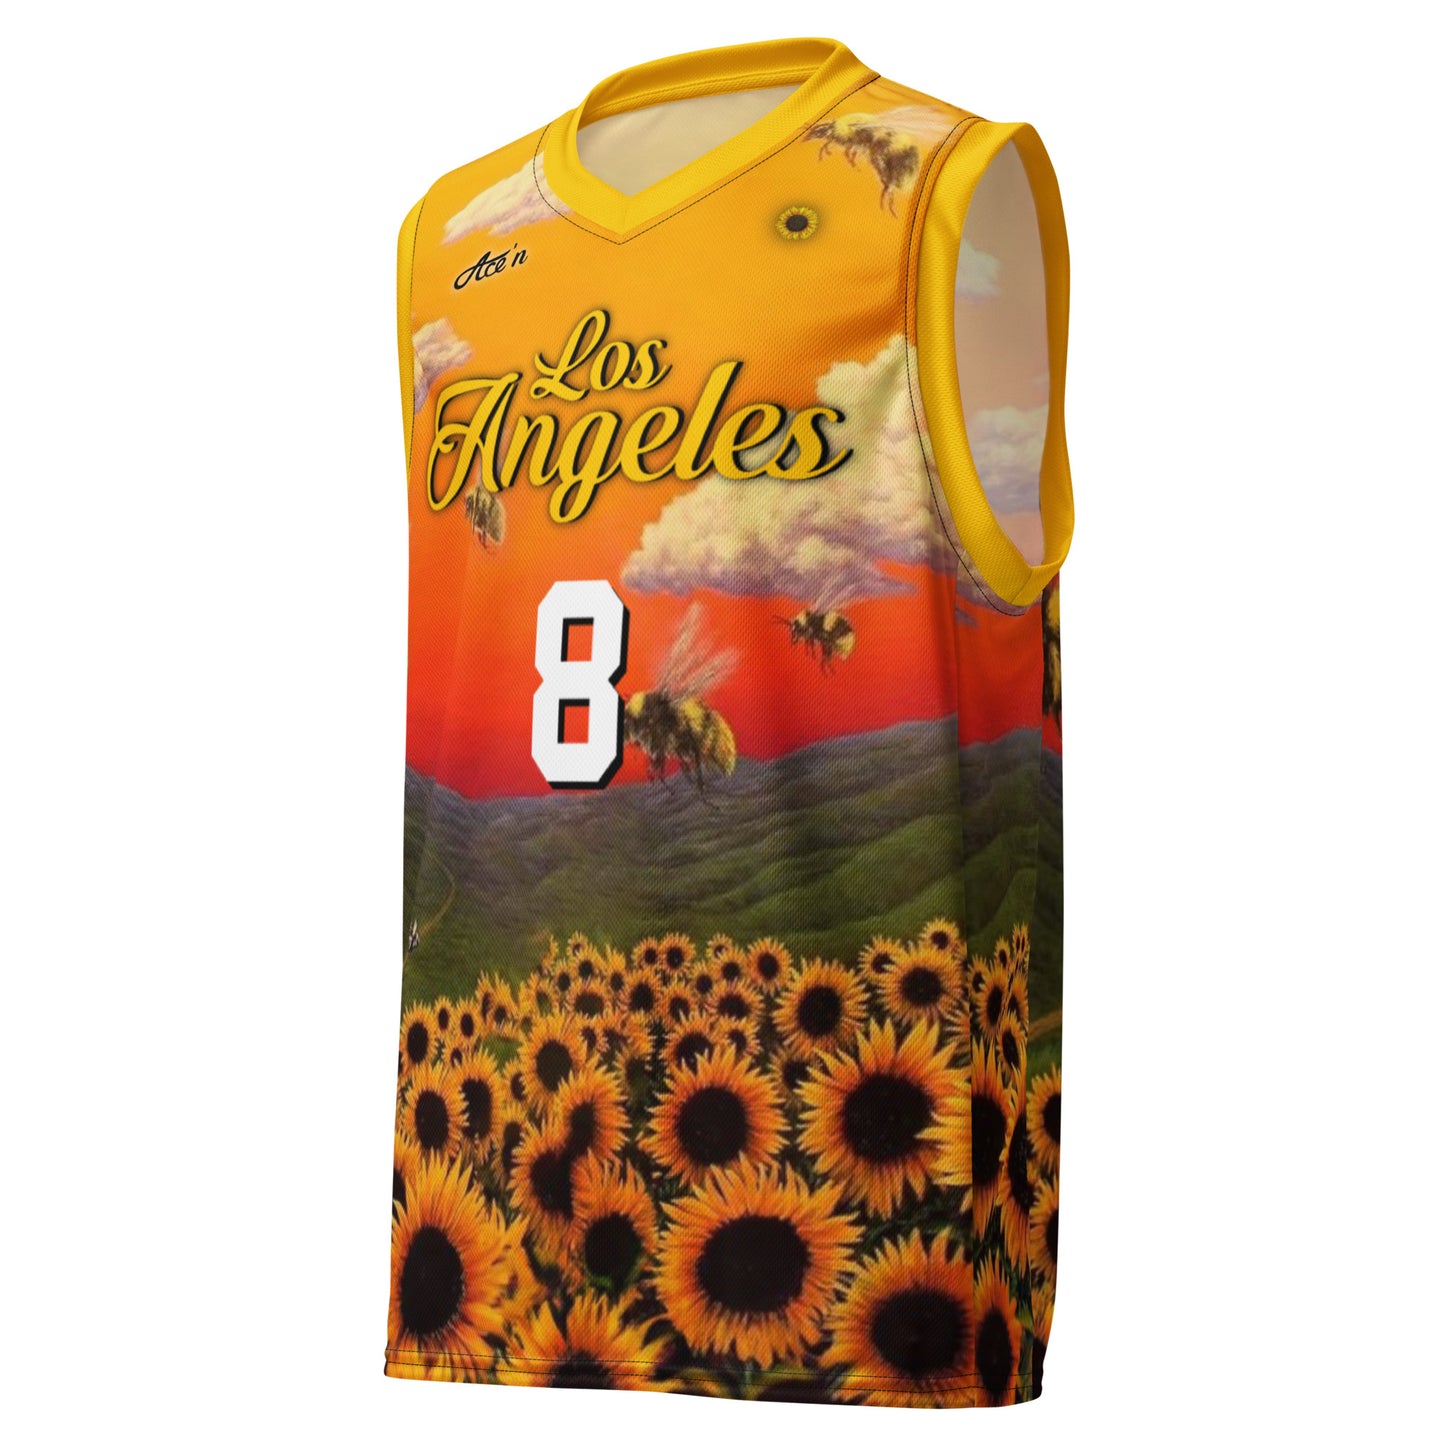 Ace'n "Los Angeles" Jersey | Bryant/#8